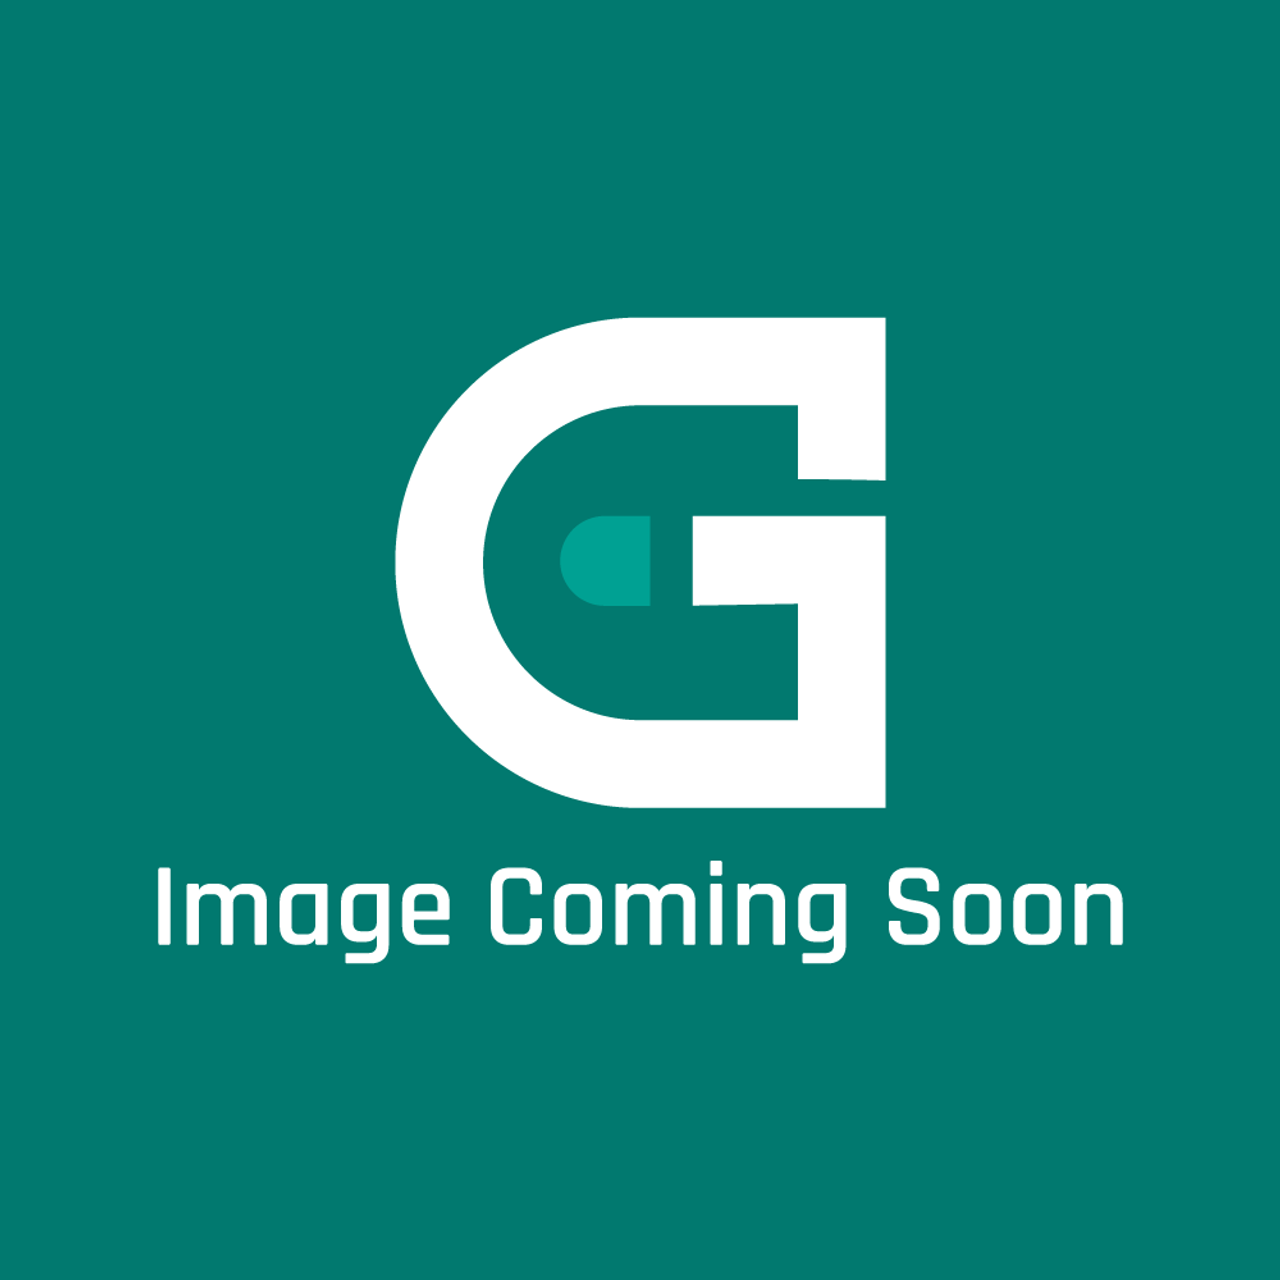 Garland G02623-34-6 - Back Spacer - Image Coming Soon!